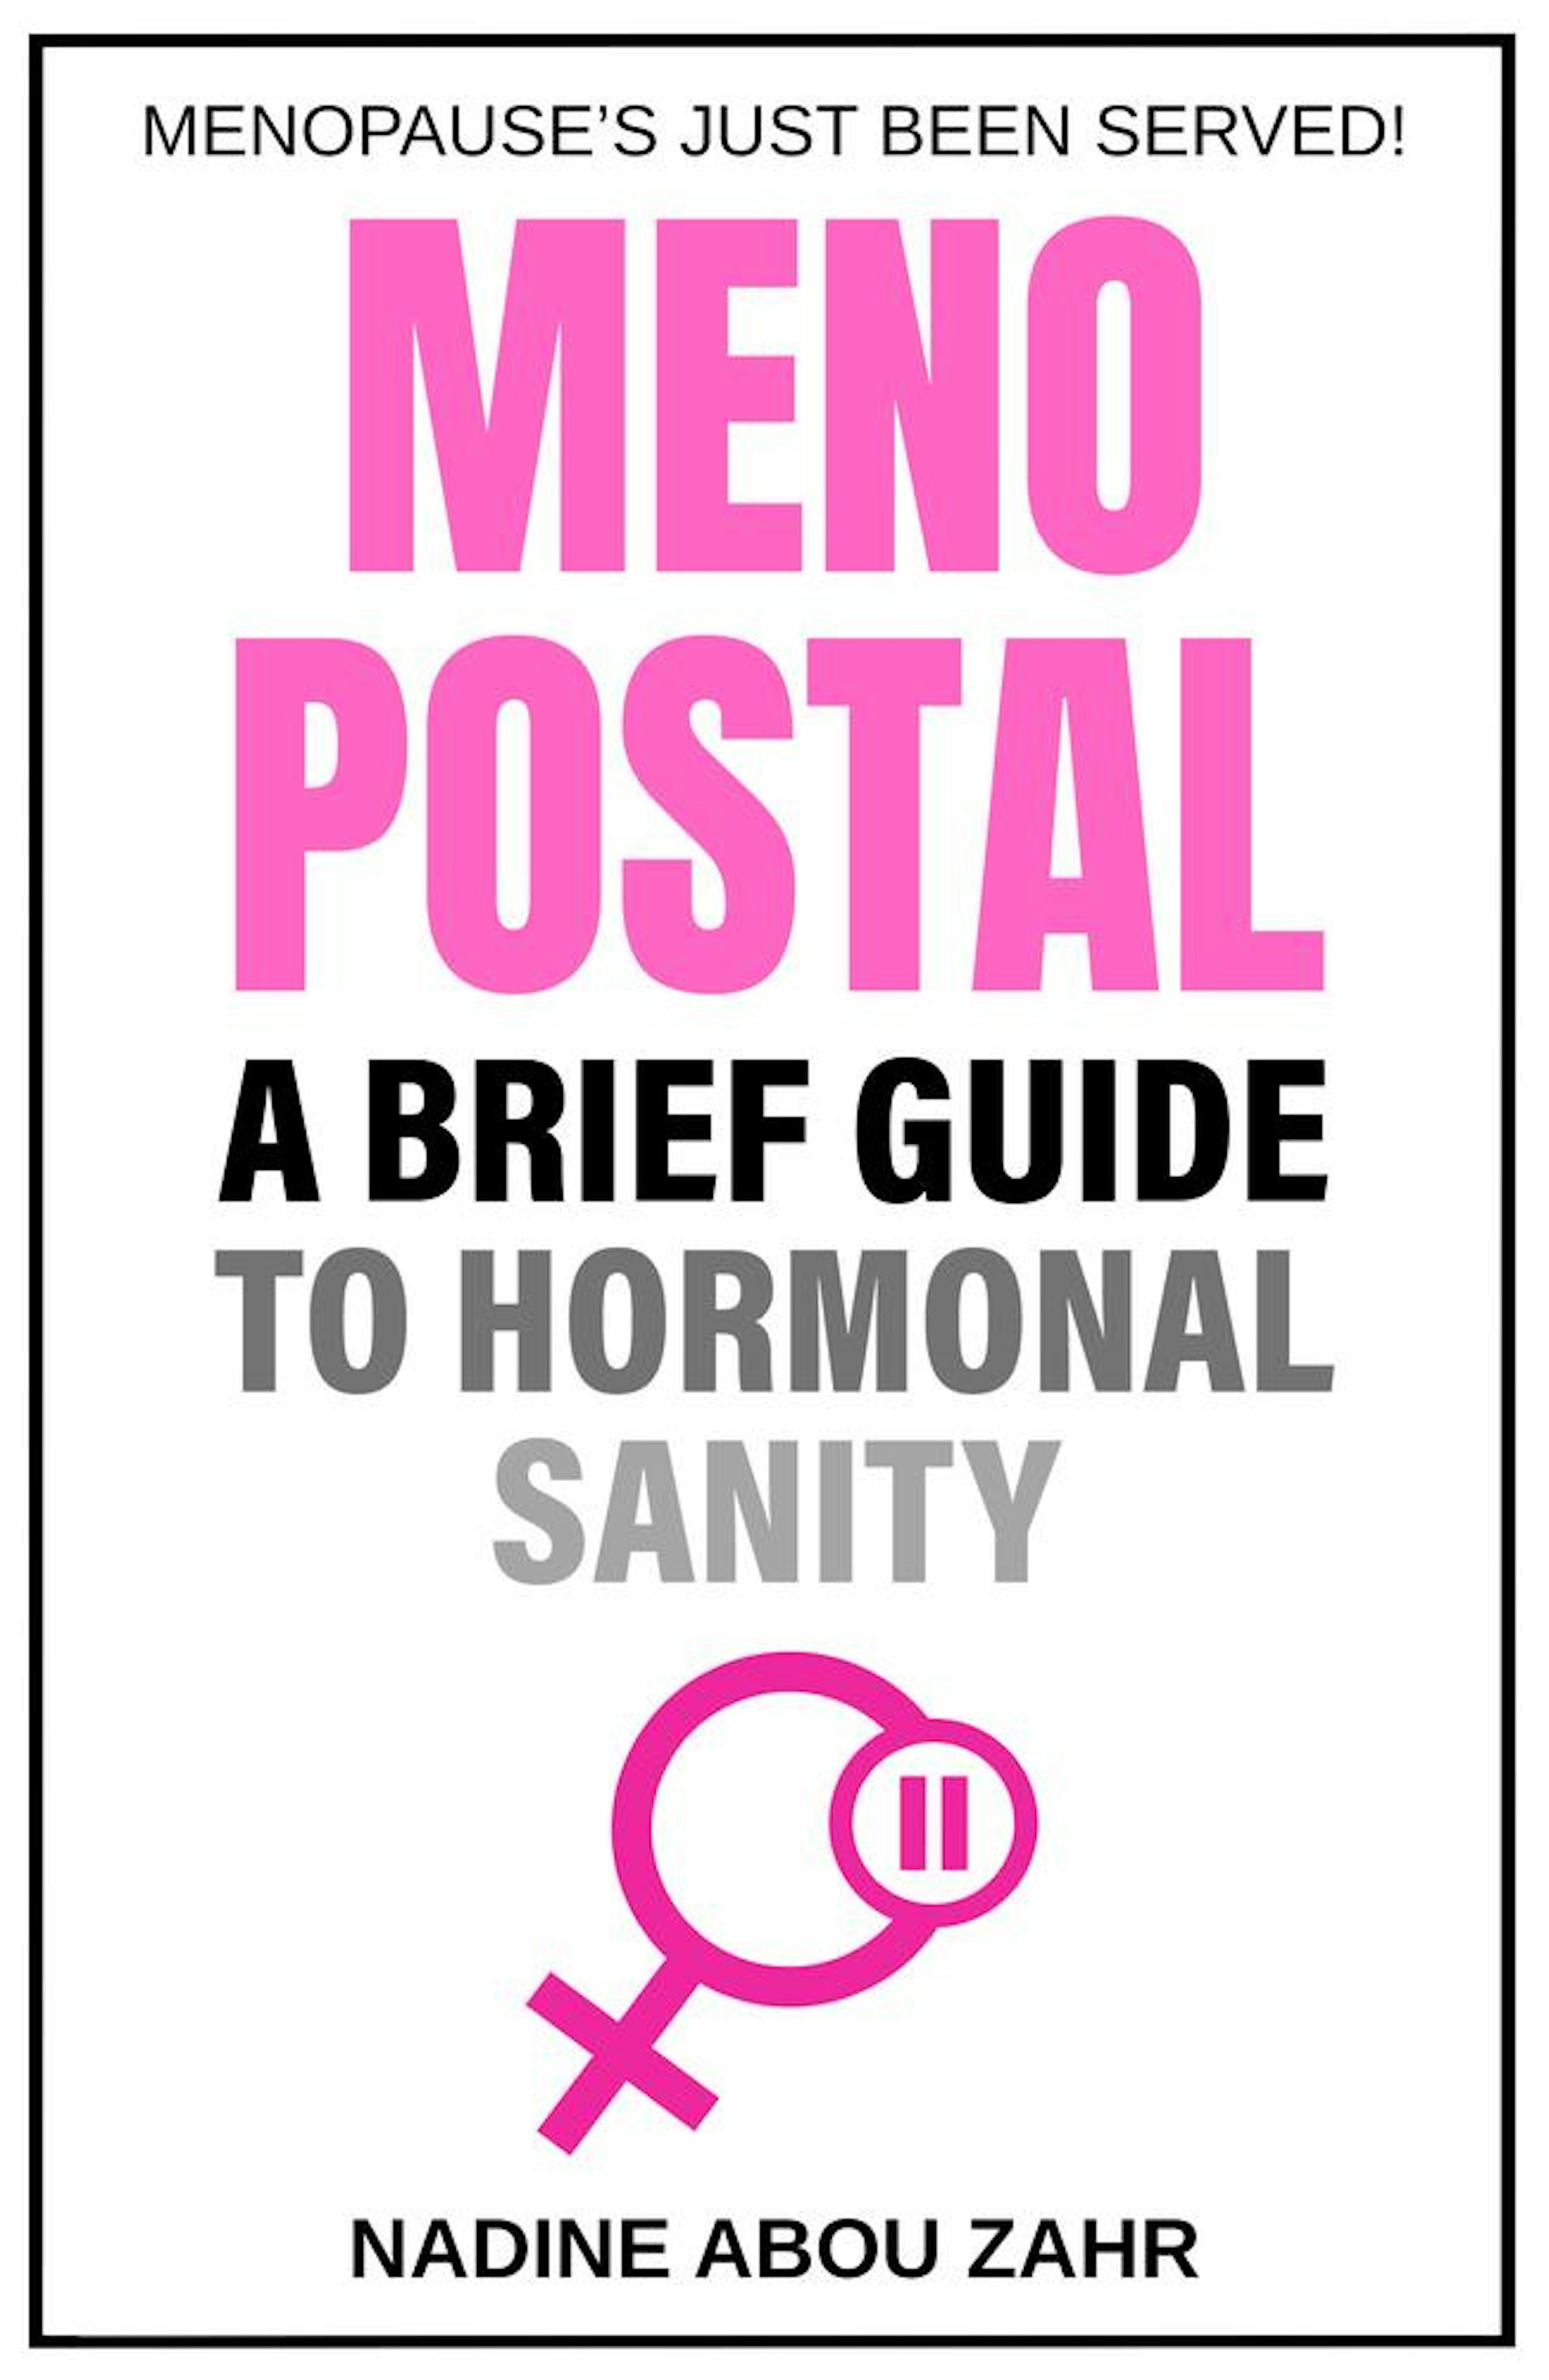 Menopostal: A Brief Guide to Hormonal Sanity